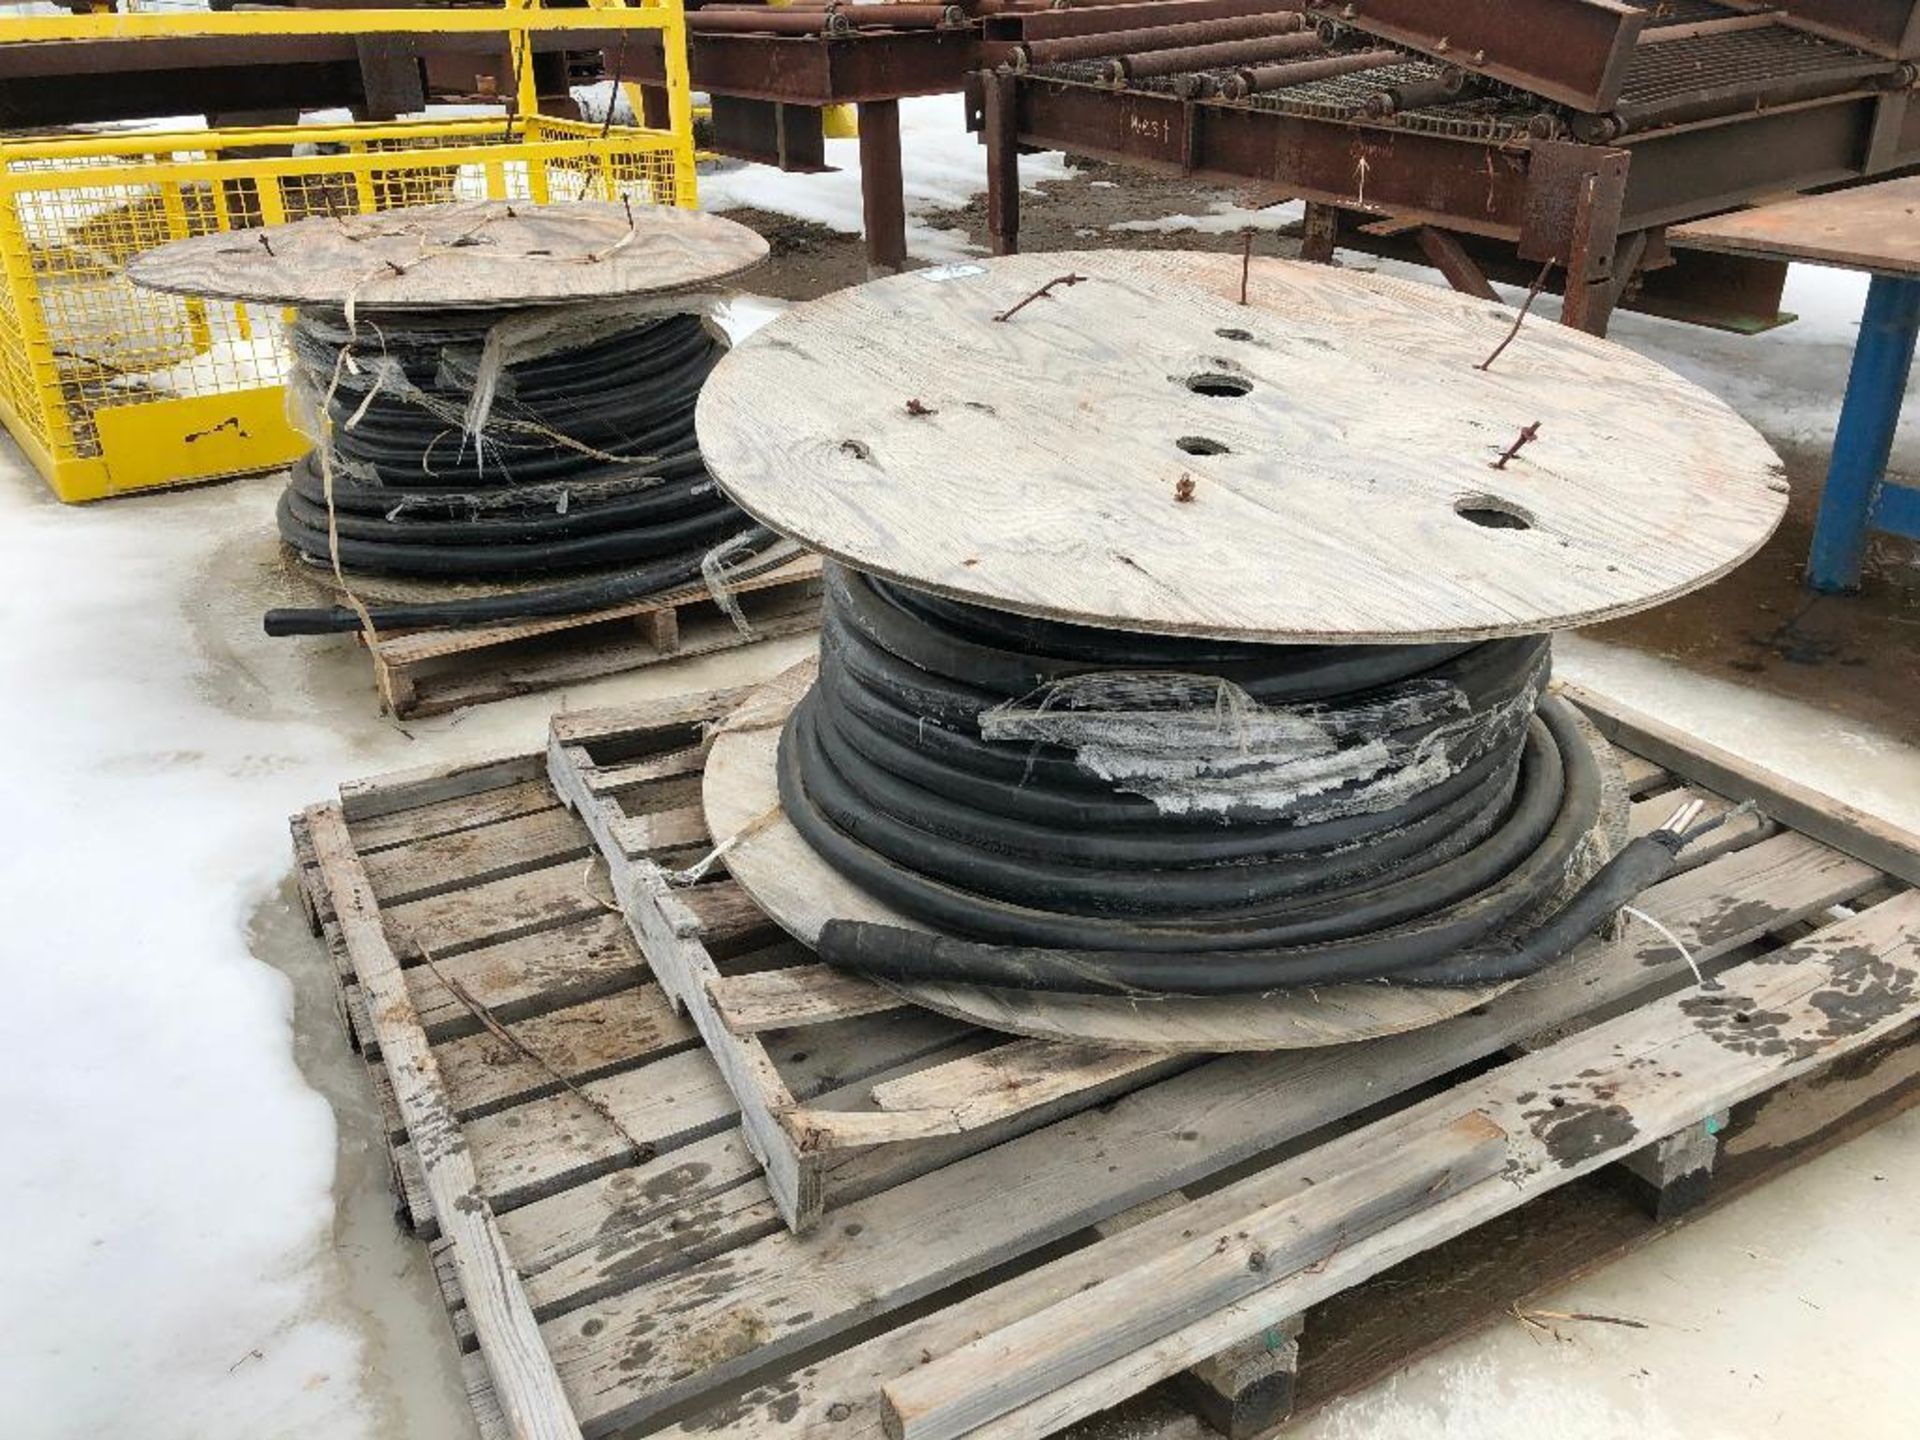 Lot of (2) Spools of Asst. Wire